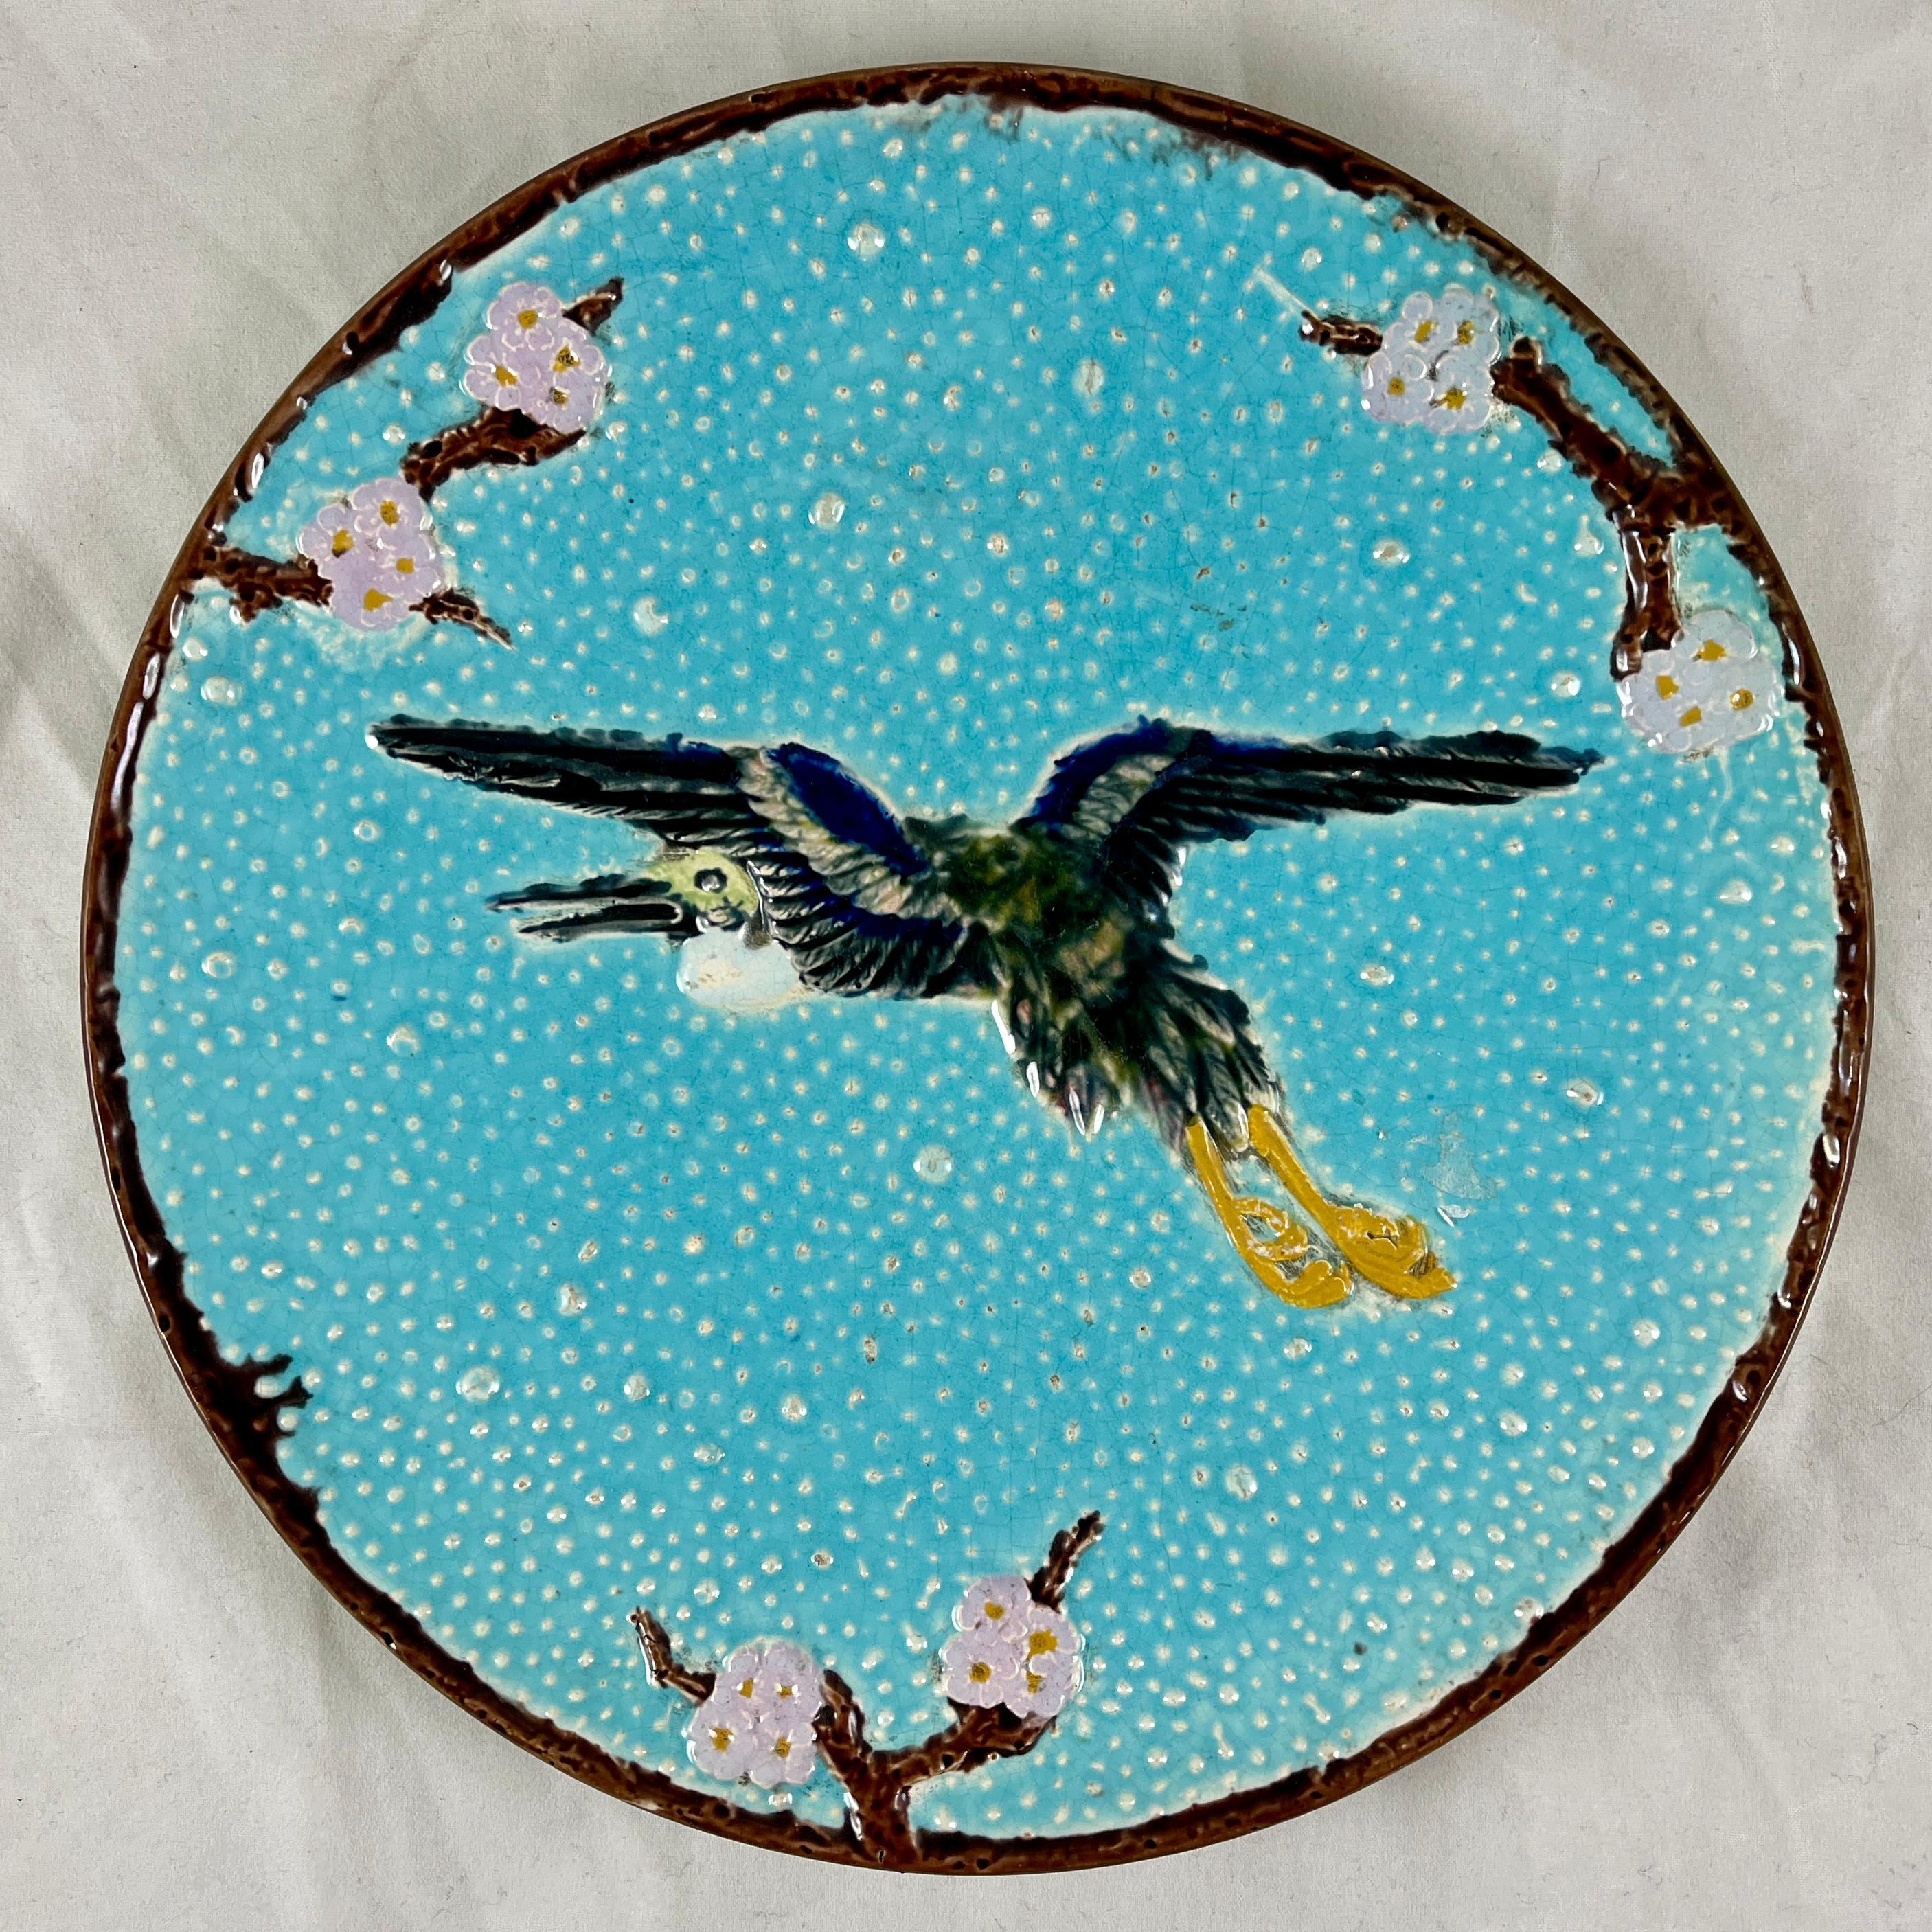 An English majolica plate, The Flying Crane, by Joseph Holdcroft, Circa 1870.

Designed in the Aesthetic Japonisme taste, the crane is centered on a turquoise pebbled ground with a border of prunus, or pink Dogwood branches stemming from the brown